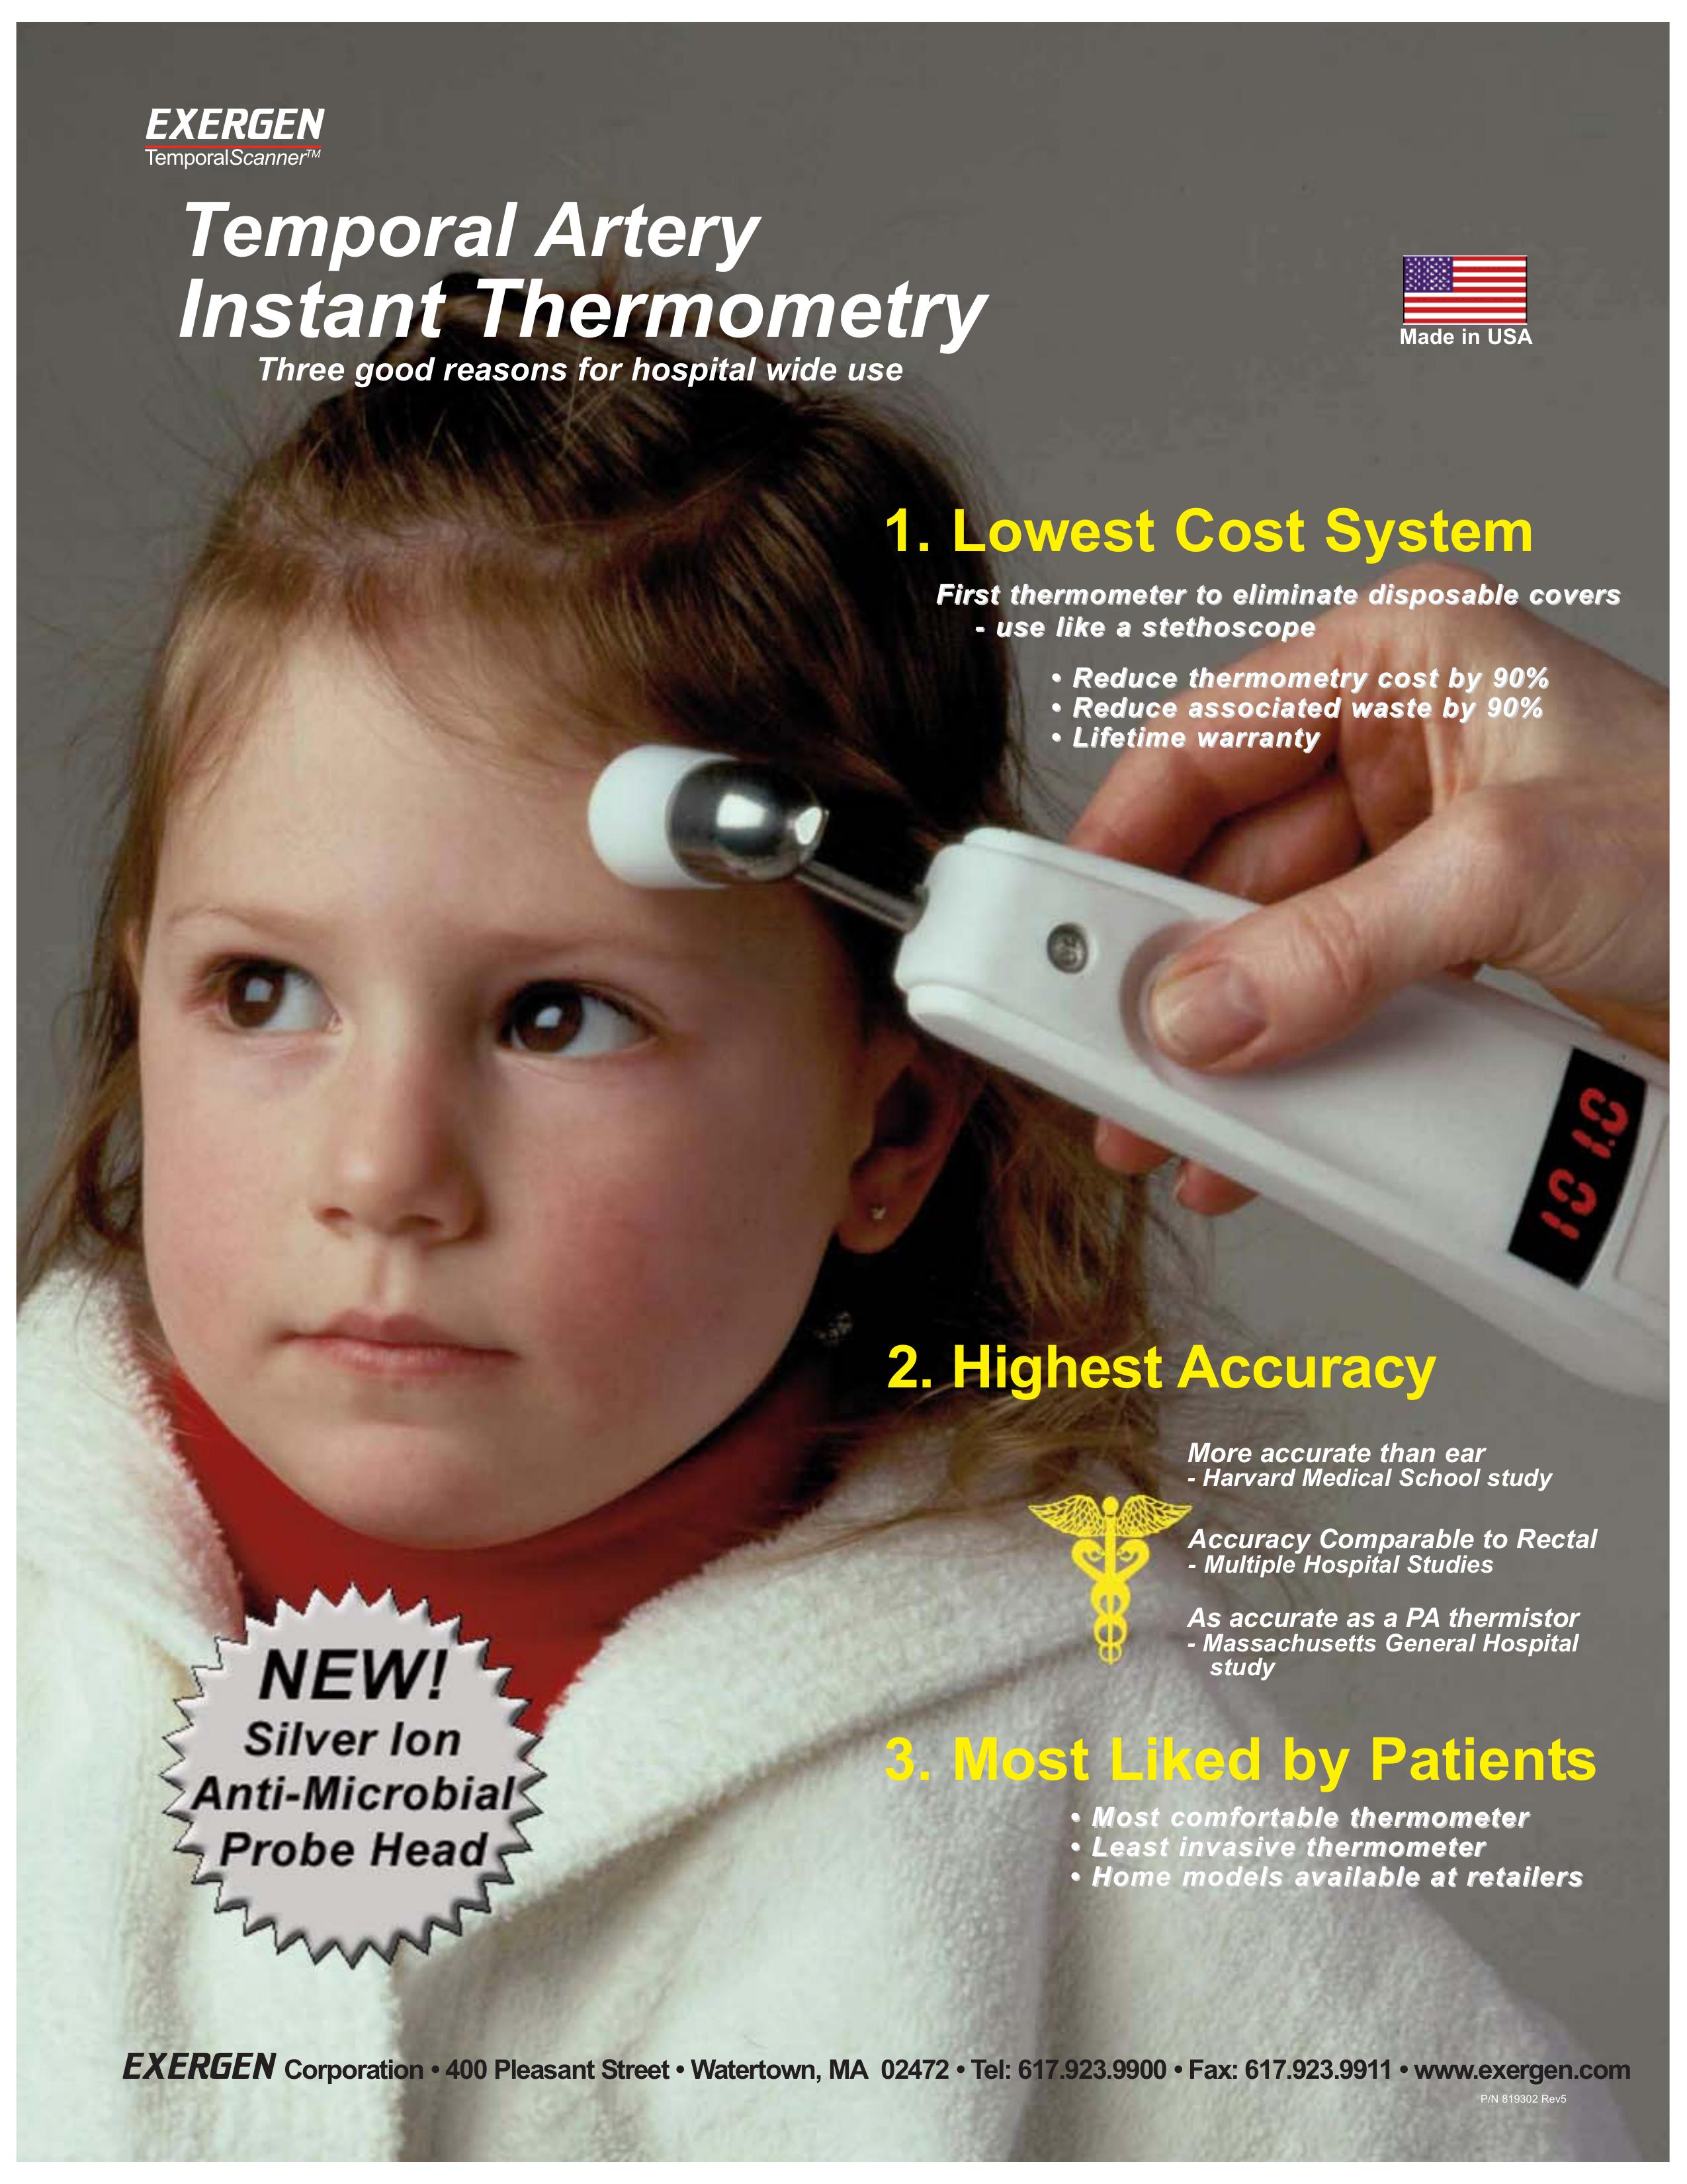 Exergen Instant Thermometry Thermometer User Manual